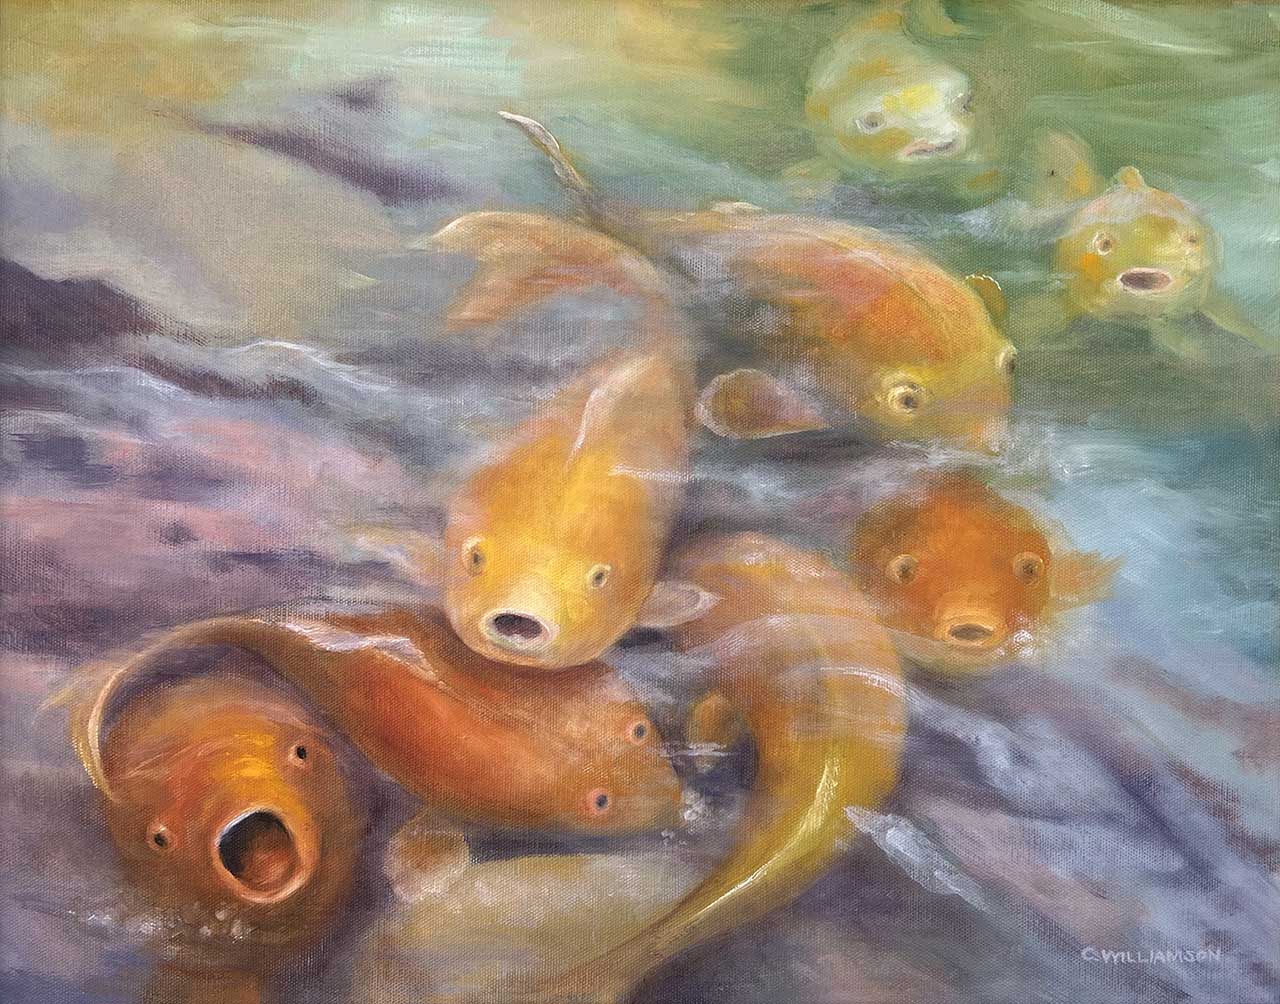 Oil painting of goldfish swimming.